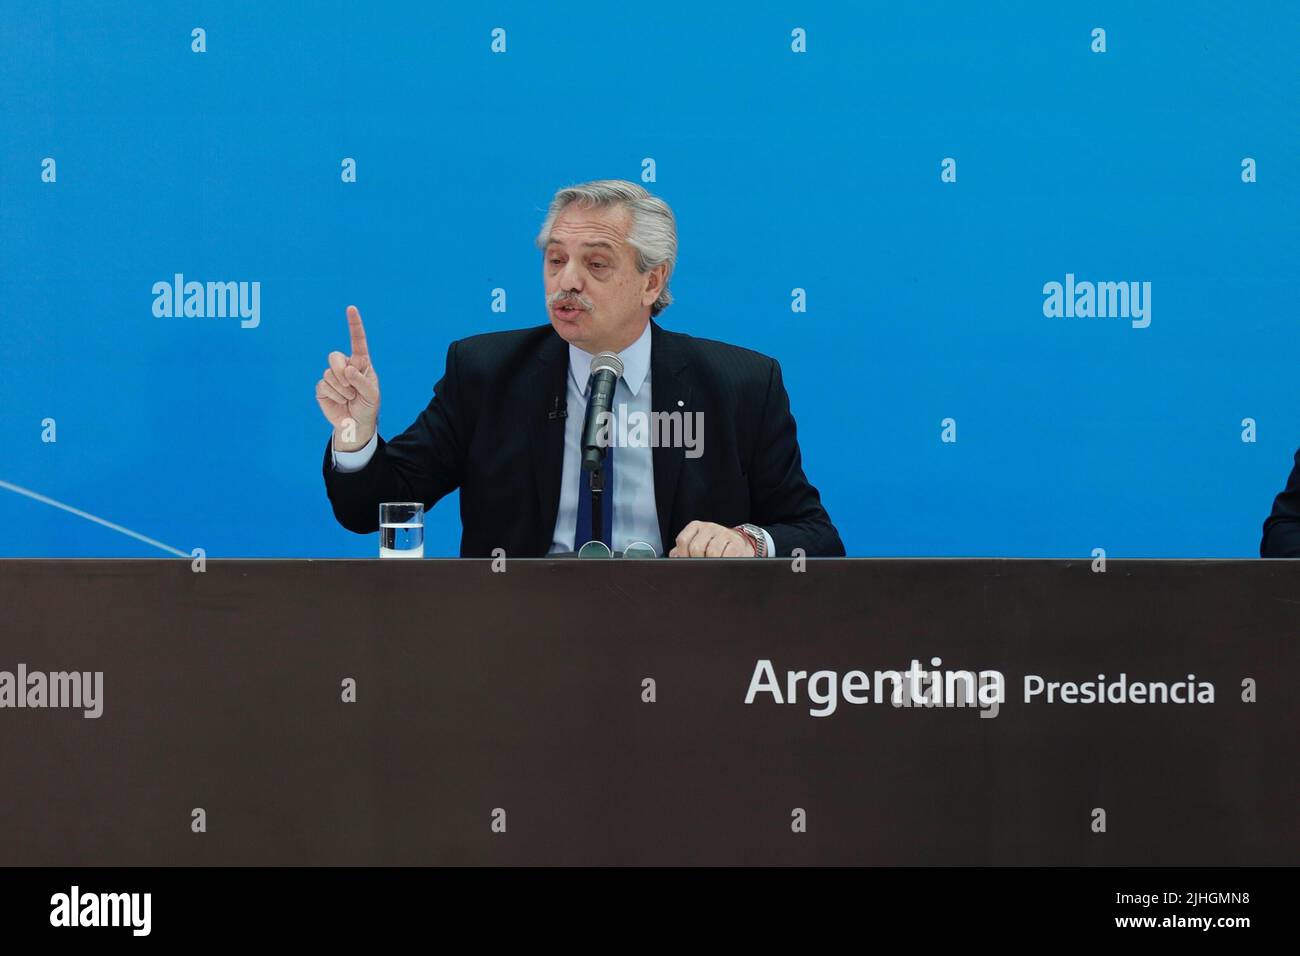 Buenos Aires, 18th July 2022. President Alberto Fernández led the presentation of Argentina Grande, Infrastructure Plan for the Development of the Nation, together with the Minister of Public Works, Gabriel Katopodis. The President of the Nation Alberto Fernandez giving his speech at the event. (Credit: Esteban Osorio/Alamy Live News) Stock Photo